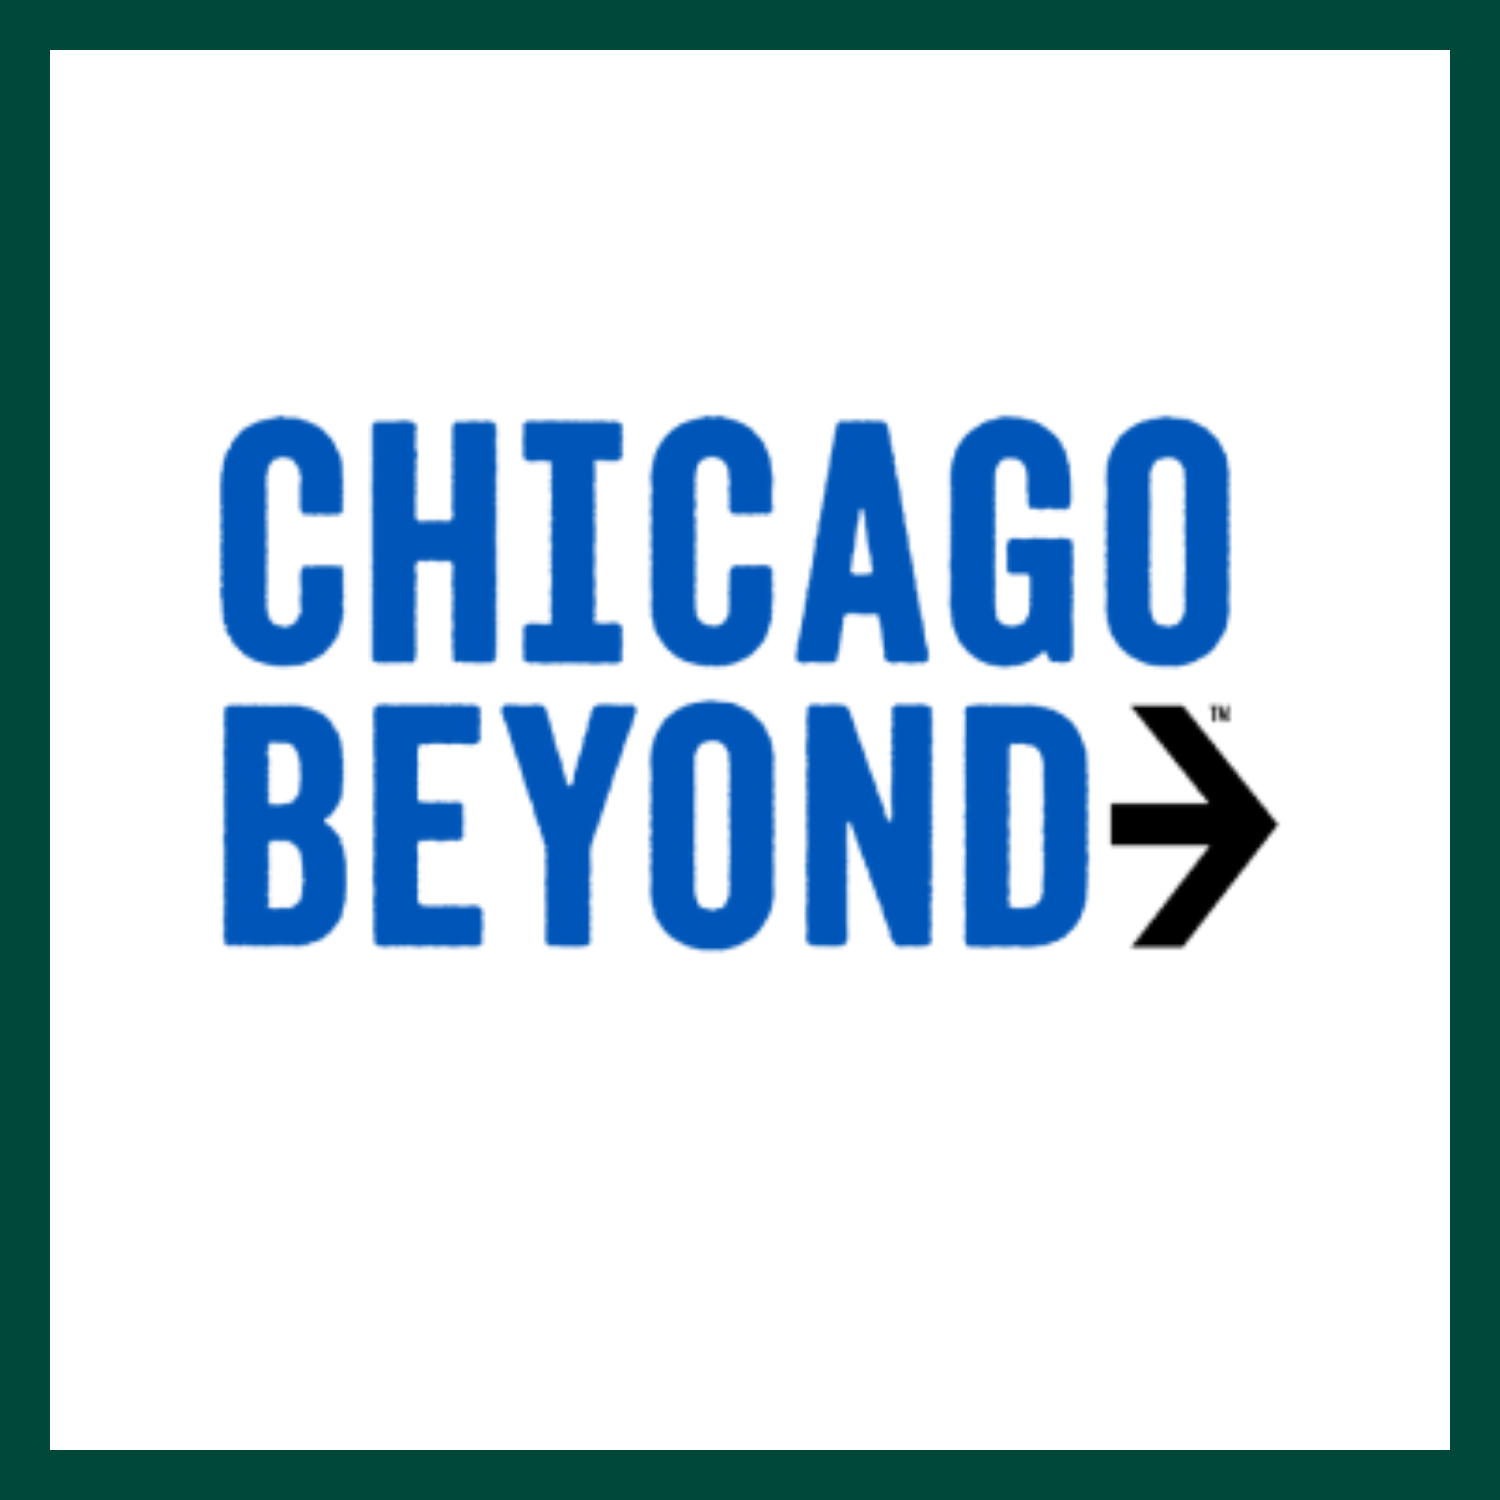 Logo for Chicago Beyond. Written in blue with a black arrow pointing to the right.